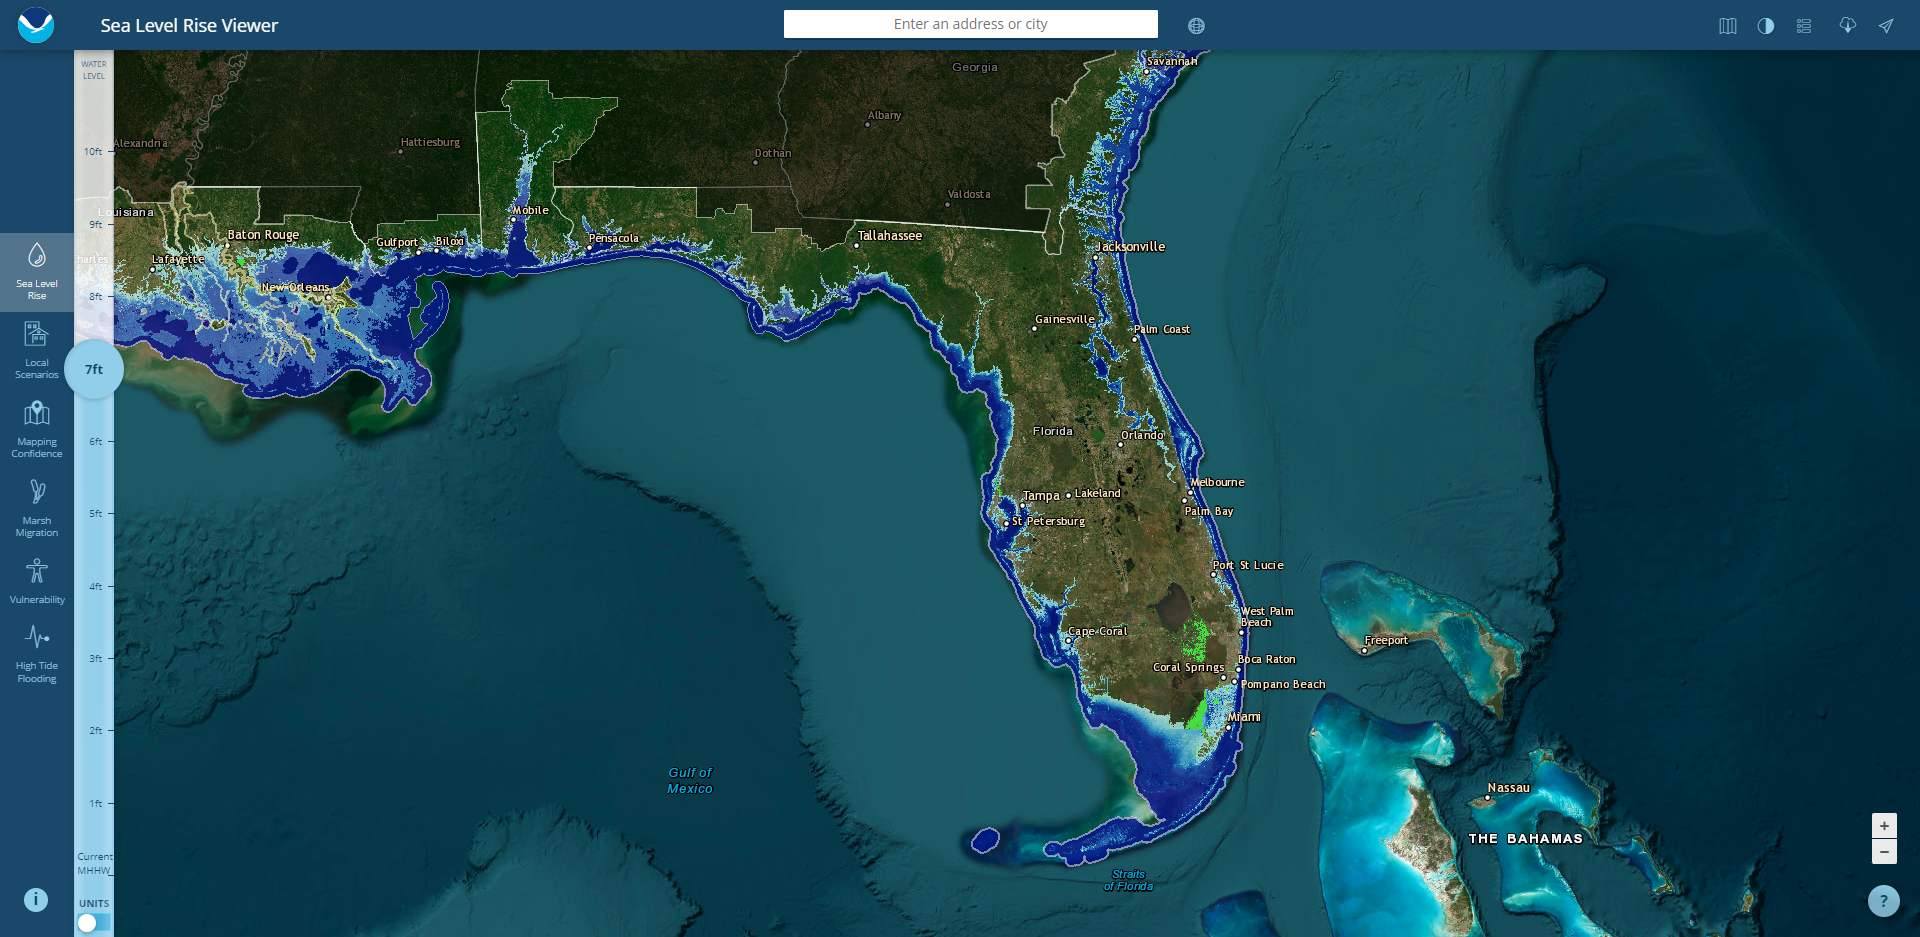 Sea Level Rise Viewer: Updating the Sunshine State